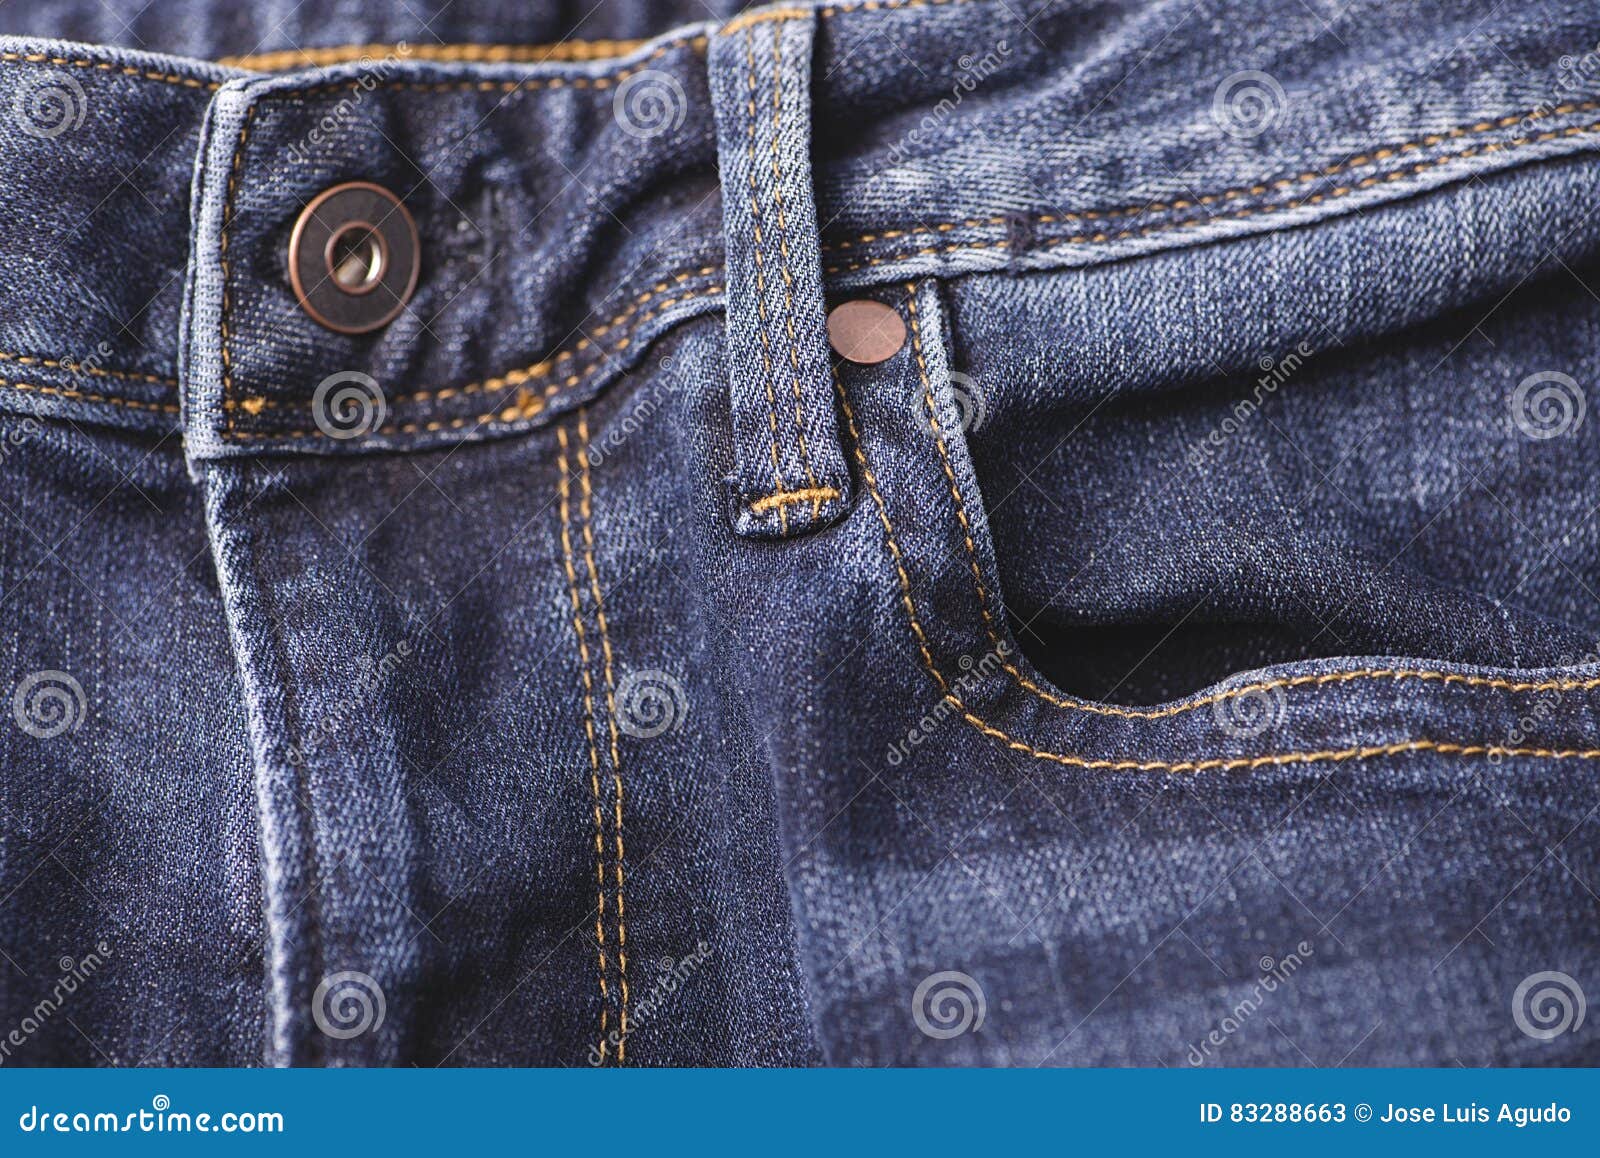 Button on a jeans fly stock image. Image of button, color - 83288663